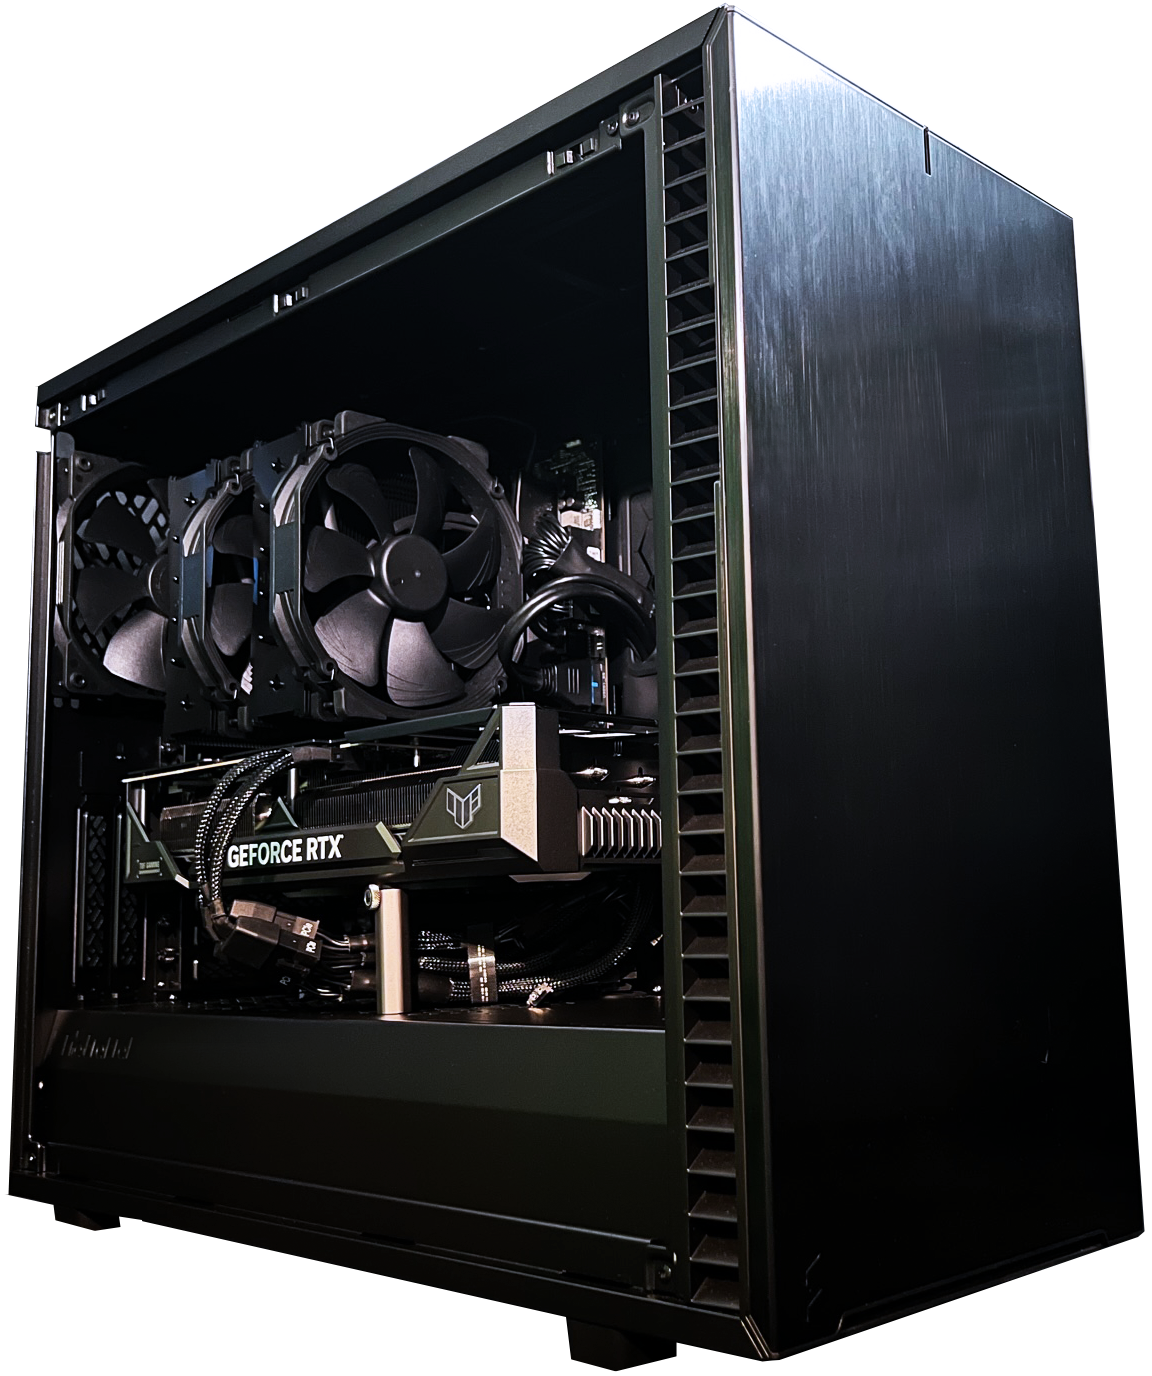 High Performance PC for 3D Artist and Developpers